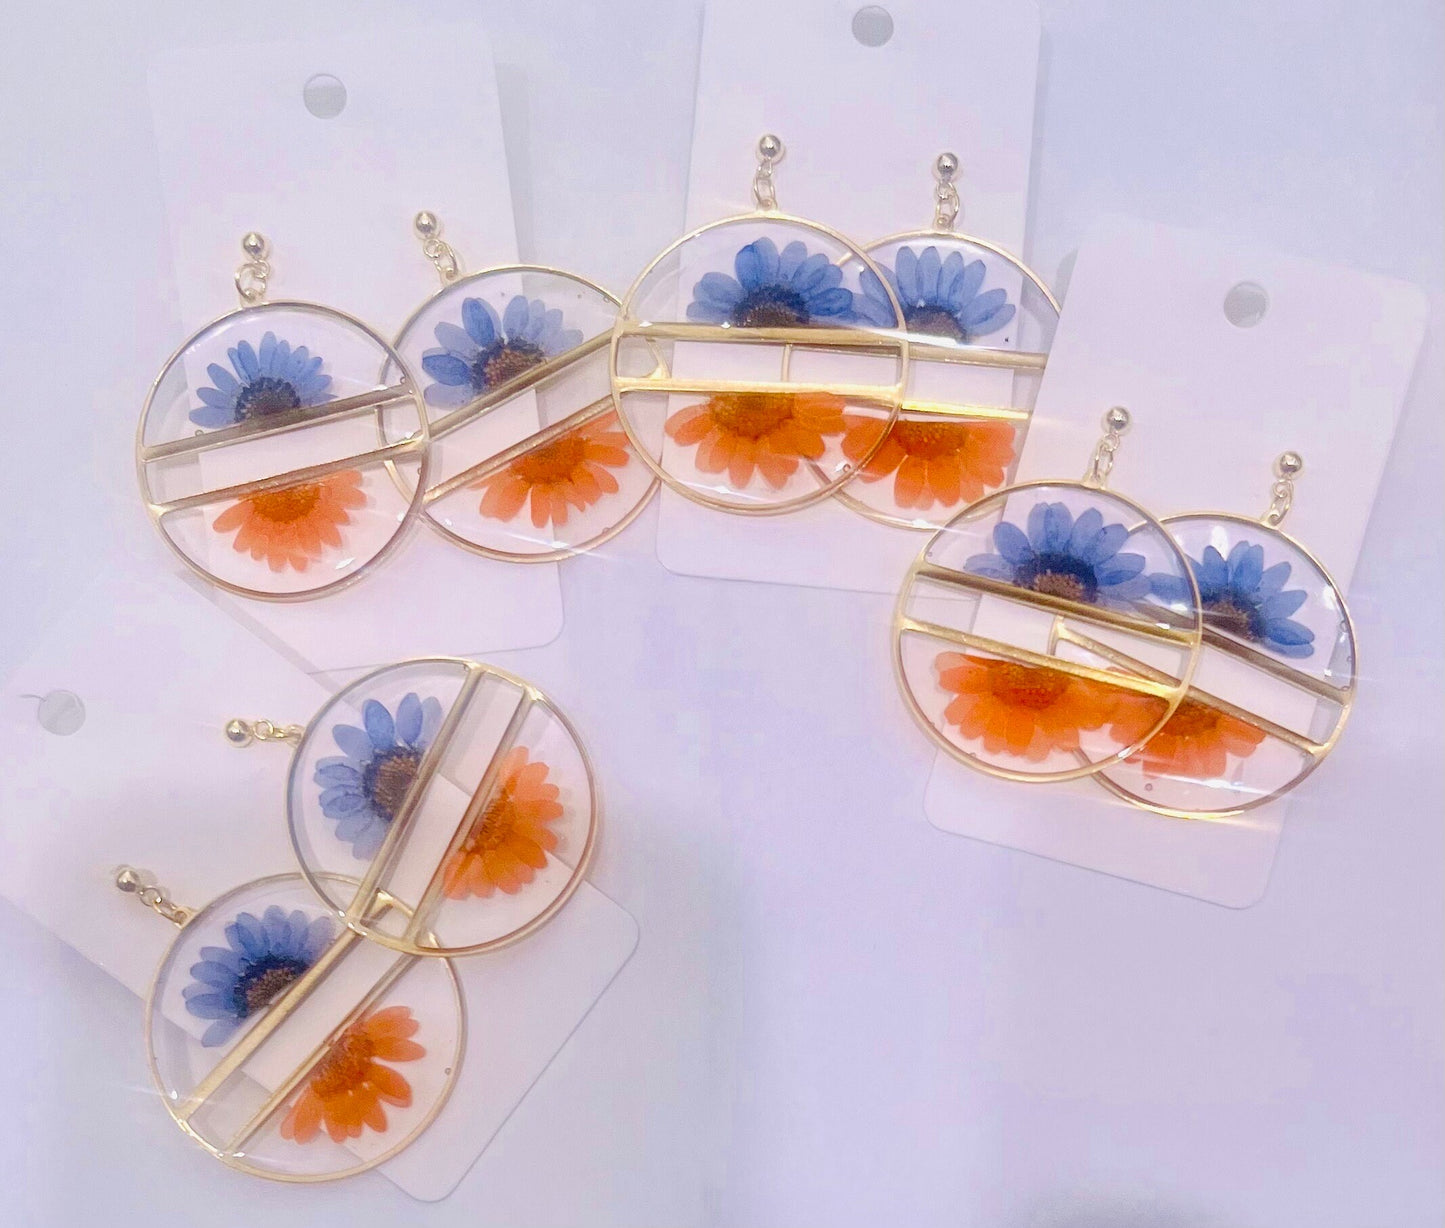 UF Gator Earrings. University of Florida. Orange and Blue. Made with real pressed flowers. Hypoallergenic Earrings. 24K gold.